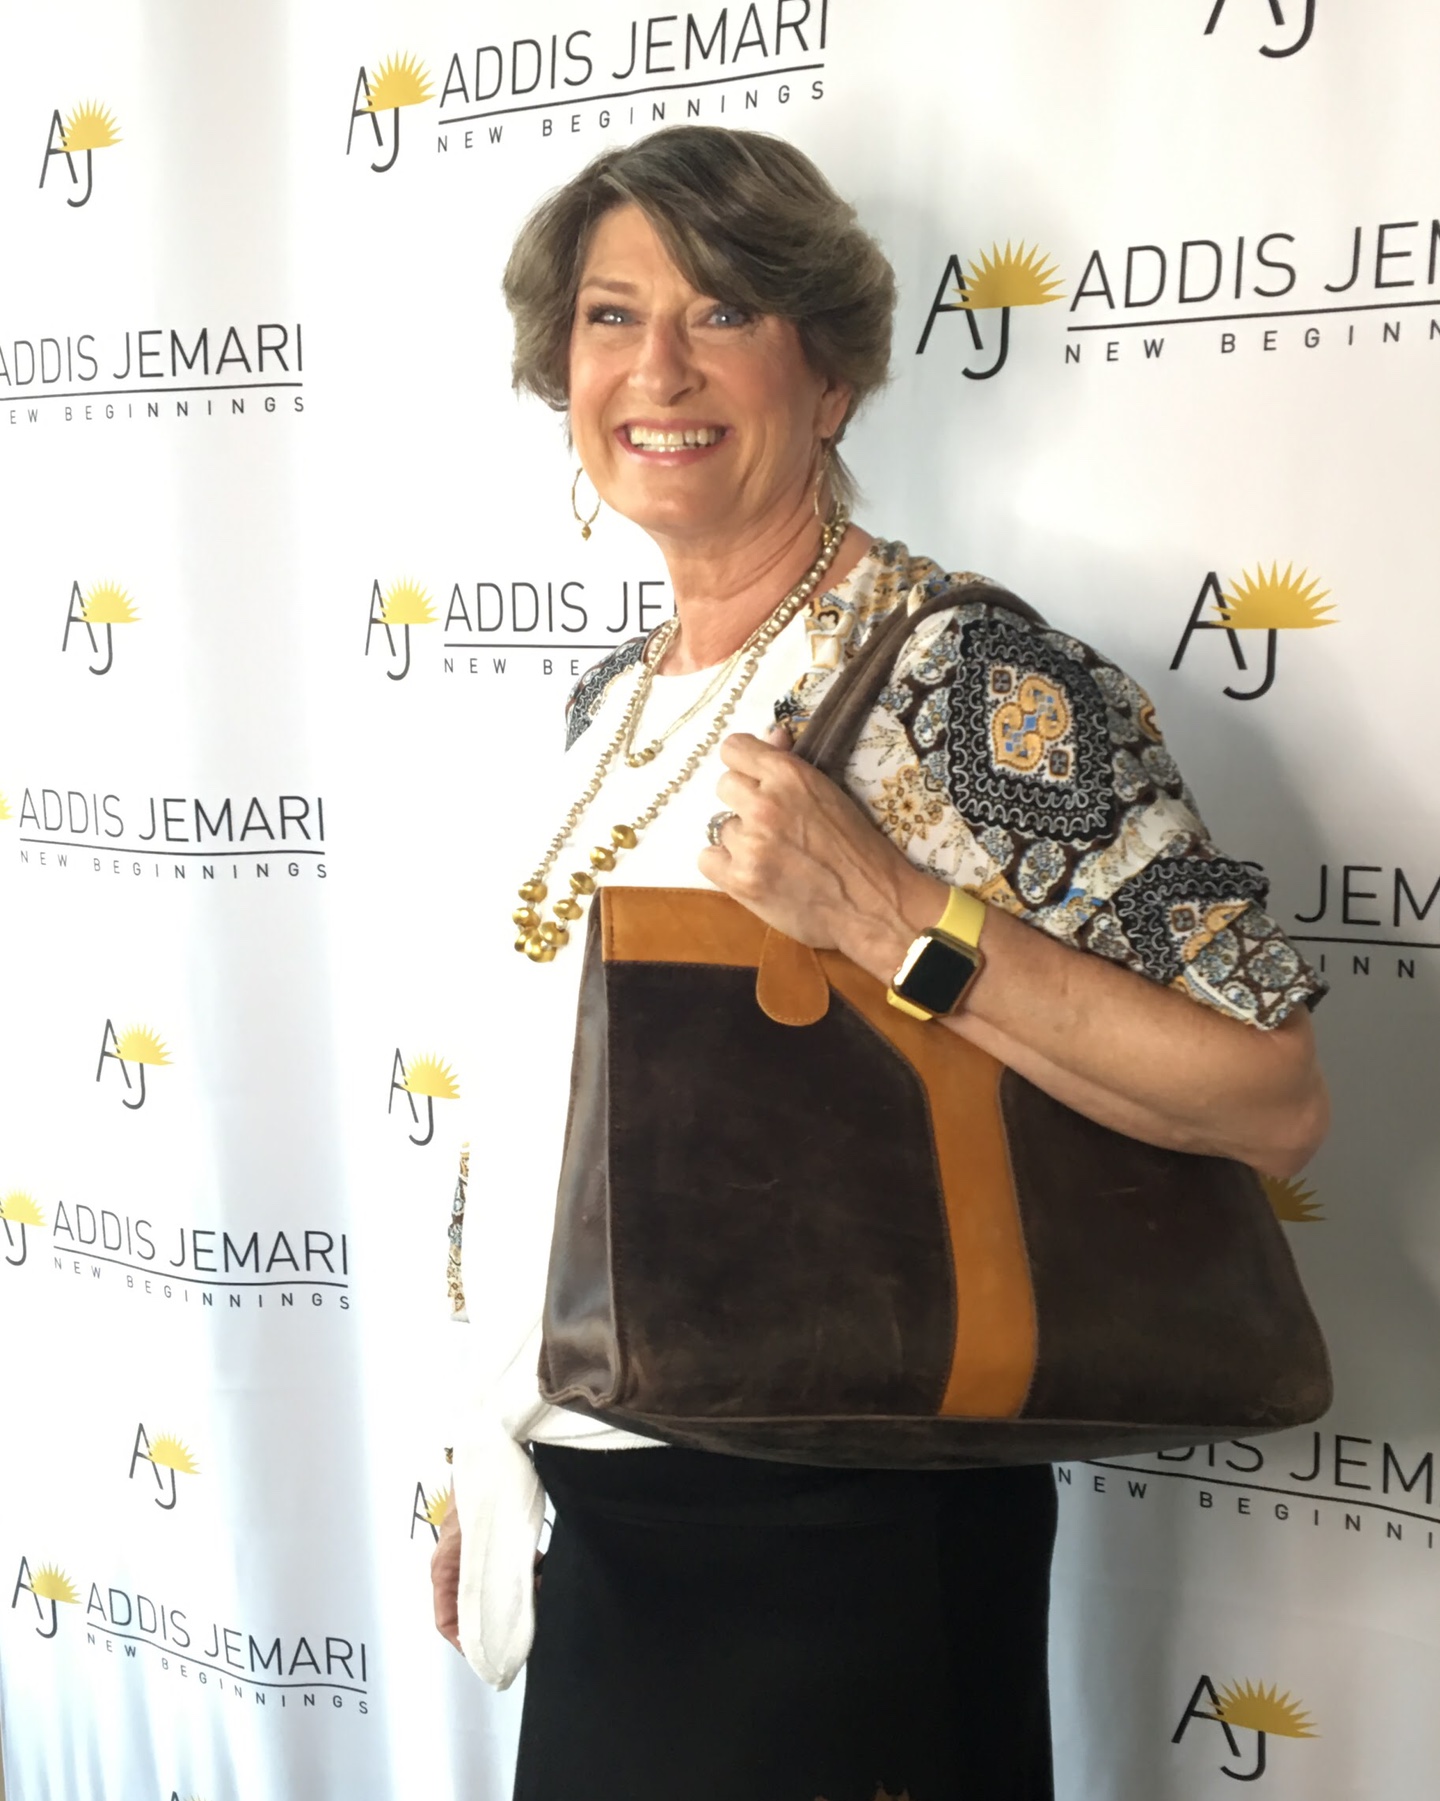 💛 We just love this AJ Marketplace supporter! 